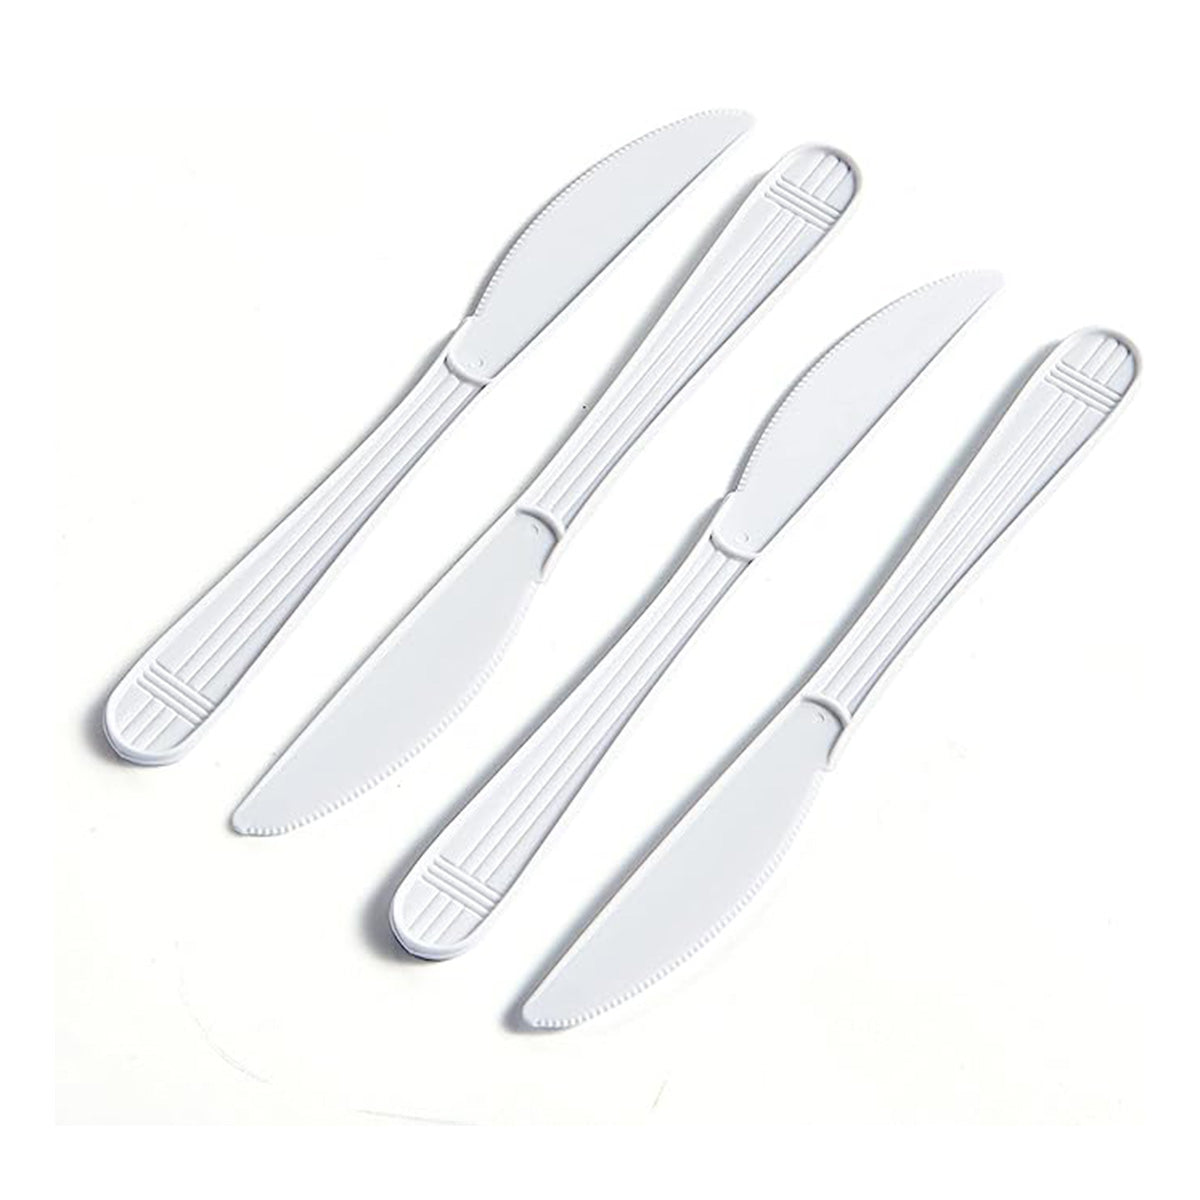 CIAO! Heavy Weight Disposable White Knife Polypropylene (Case of 1,000)